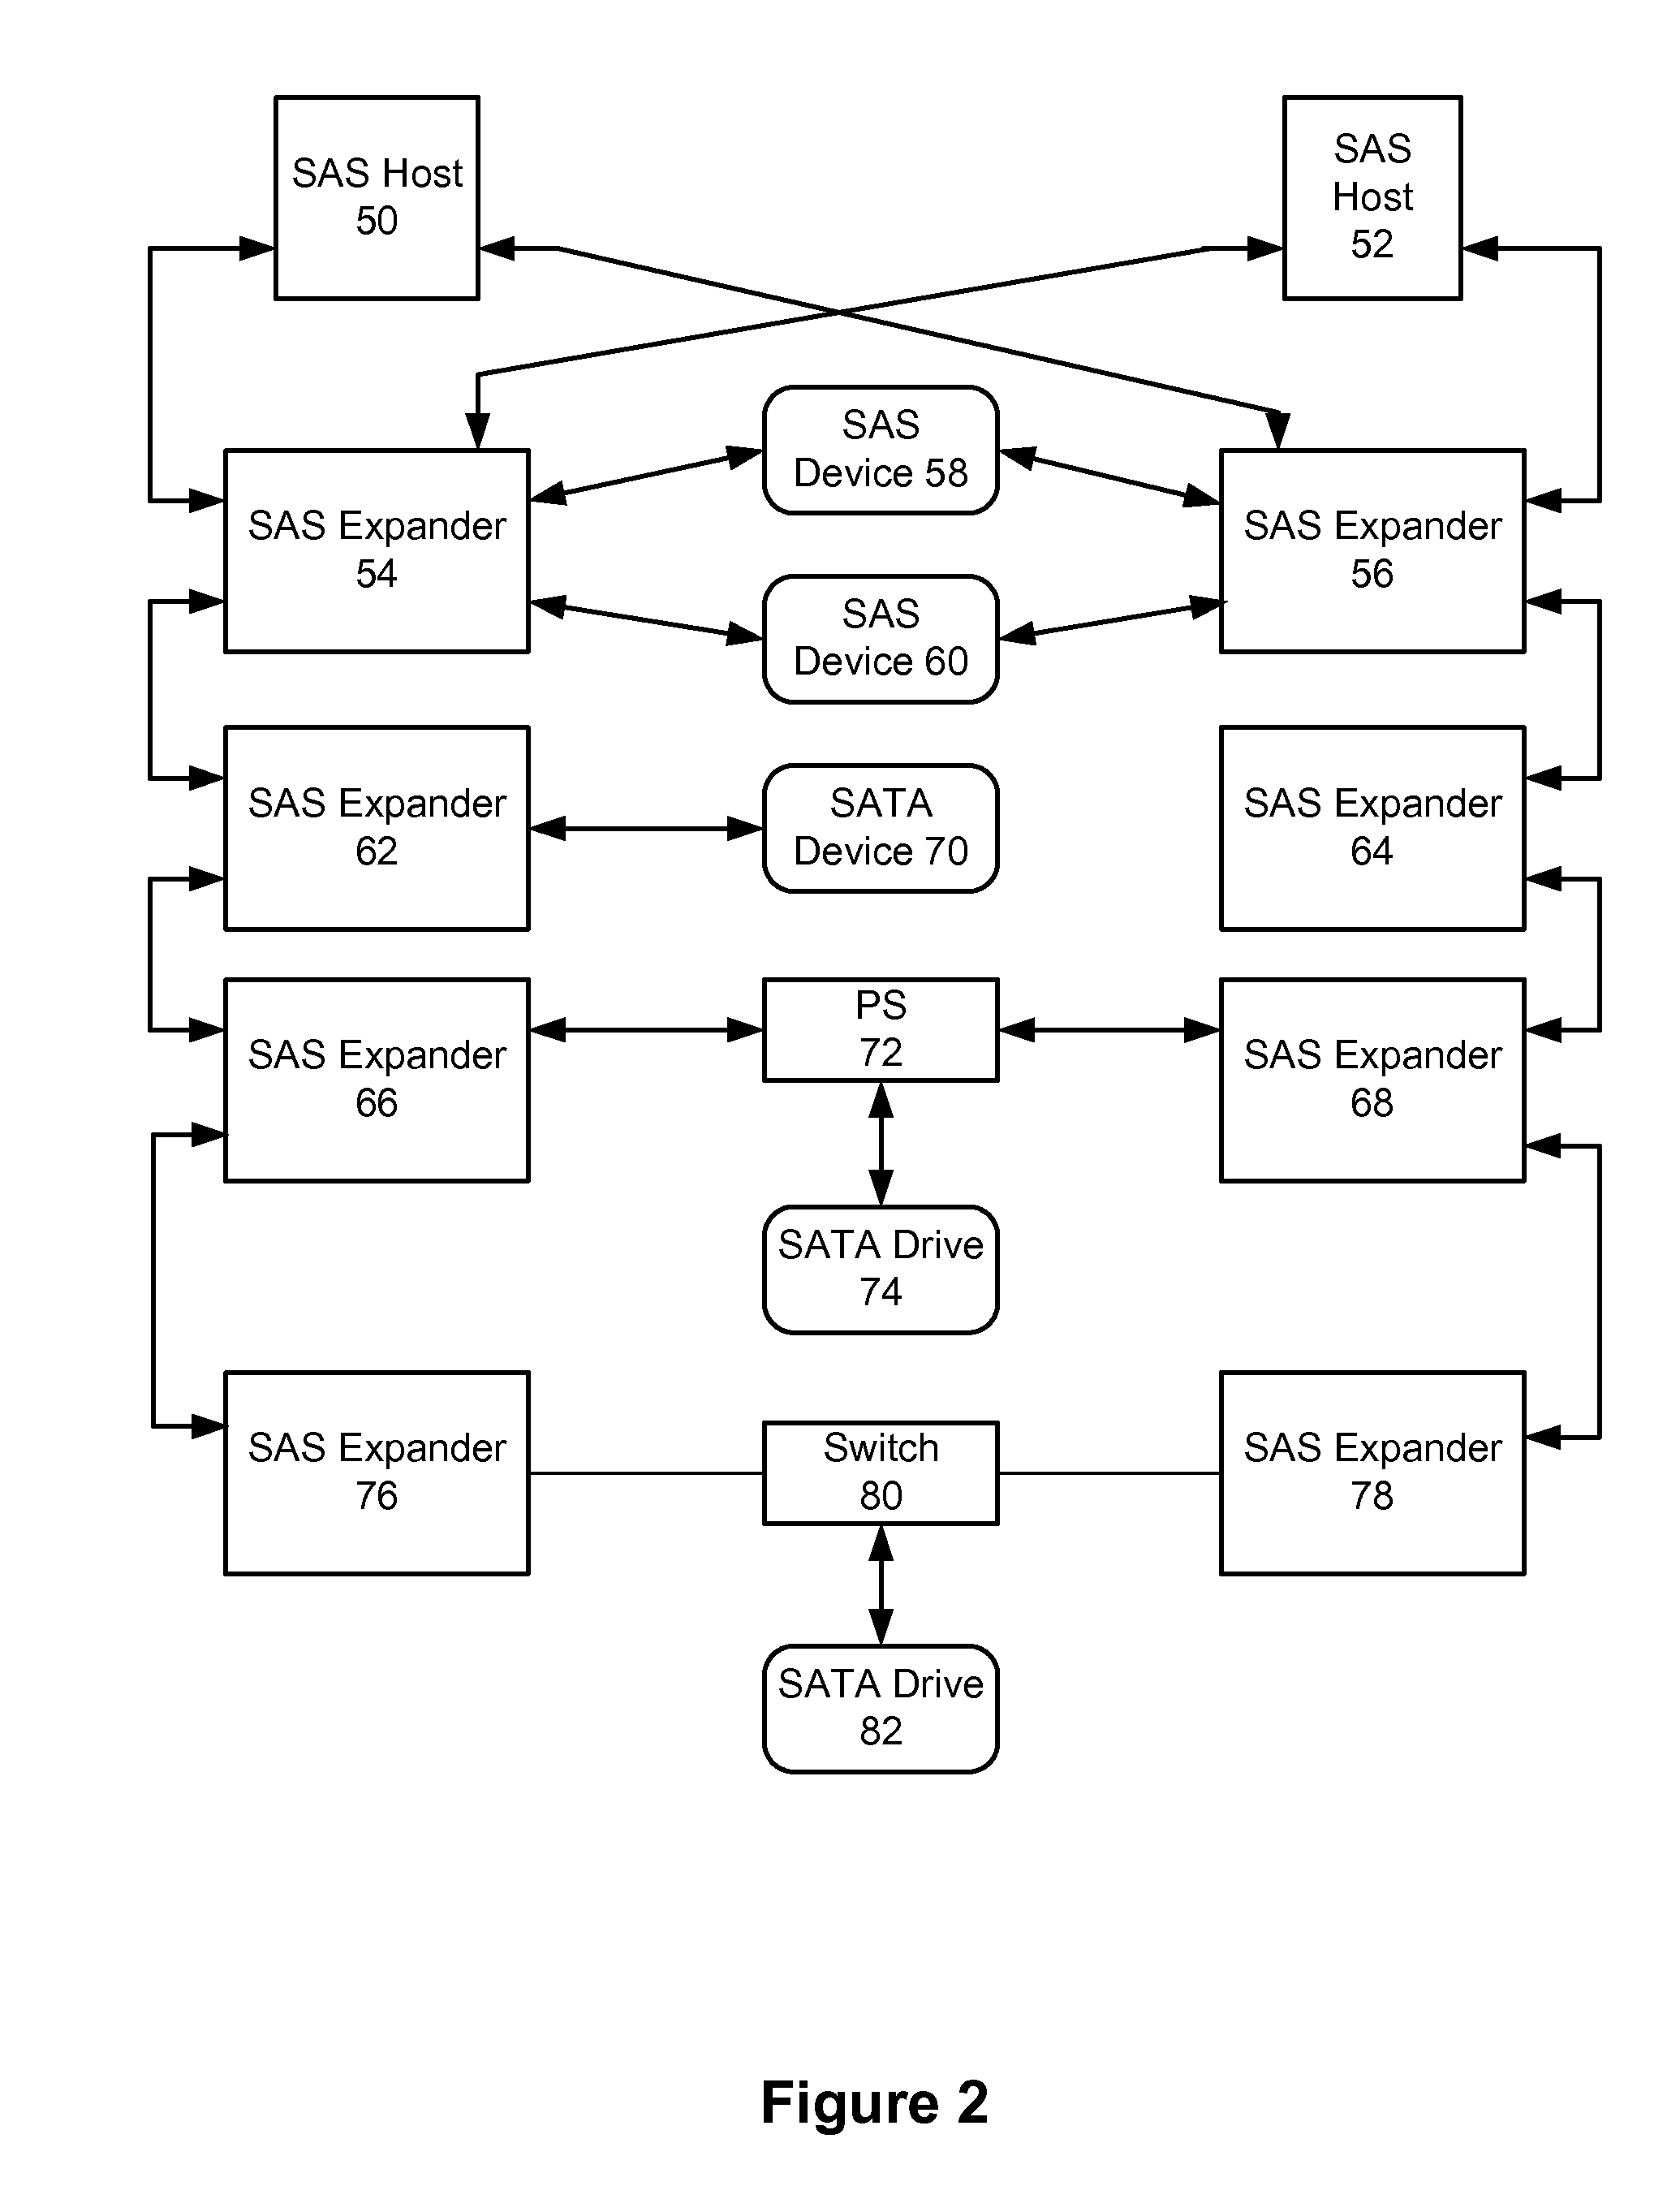 Command switching for multiple initiator access to a SATA drive